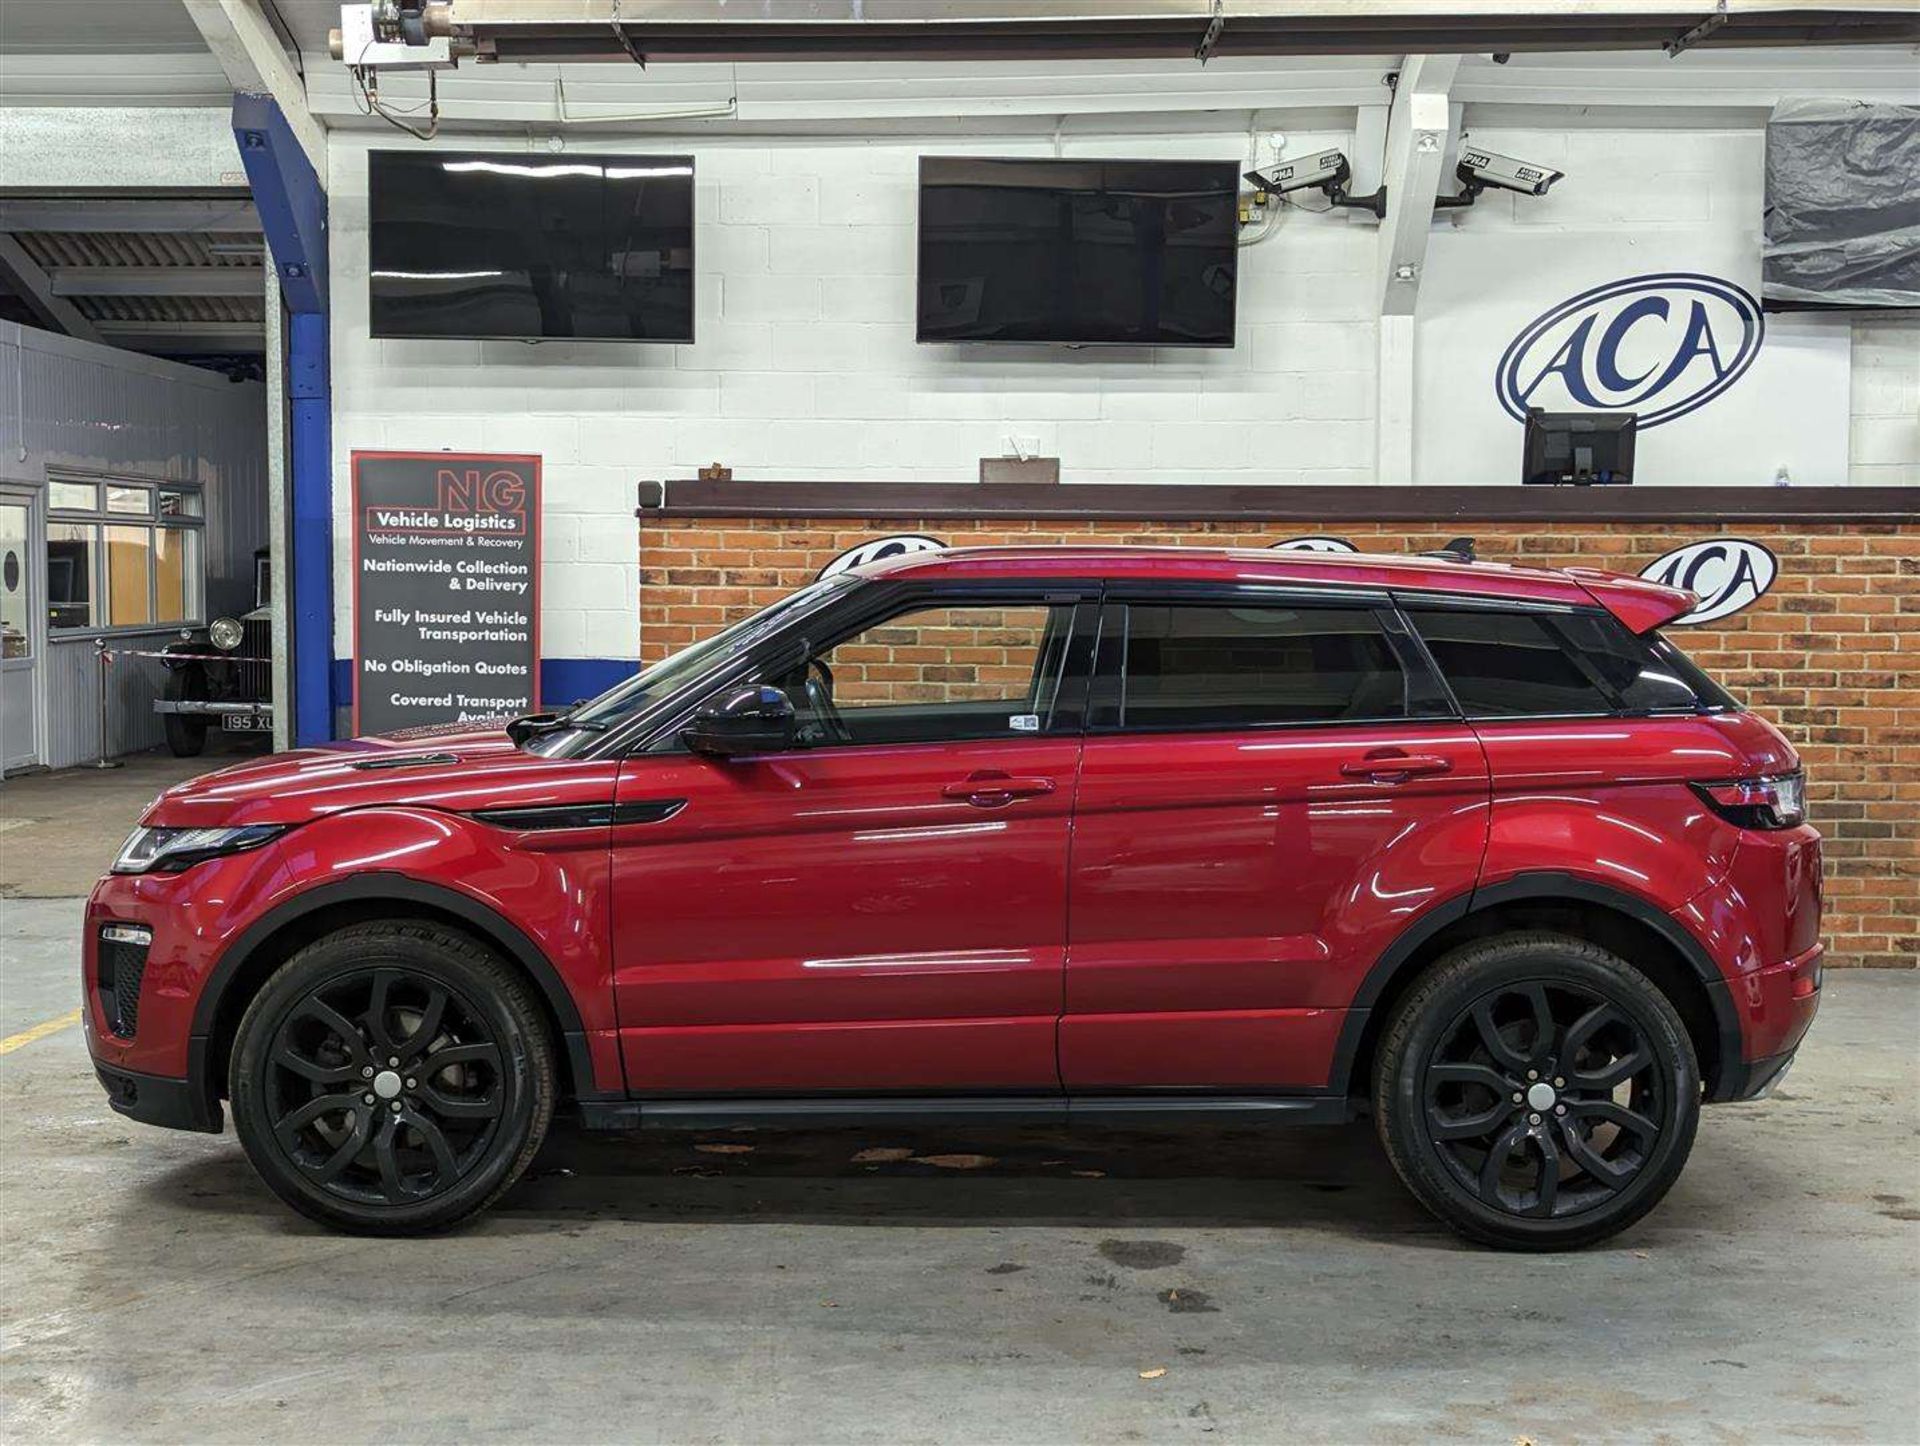 2015 LAND ROVER RANGE ROVER EVOQUE DYNAMIC 5DR AUTO - Image 2 of 26